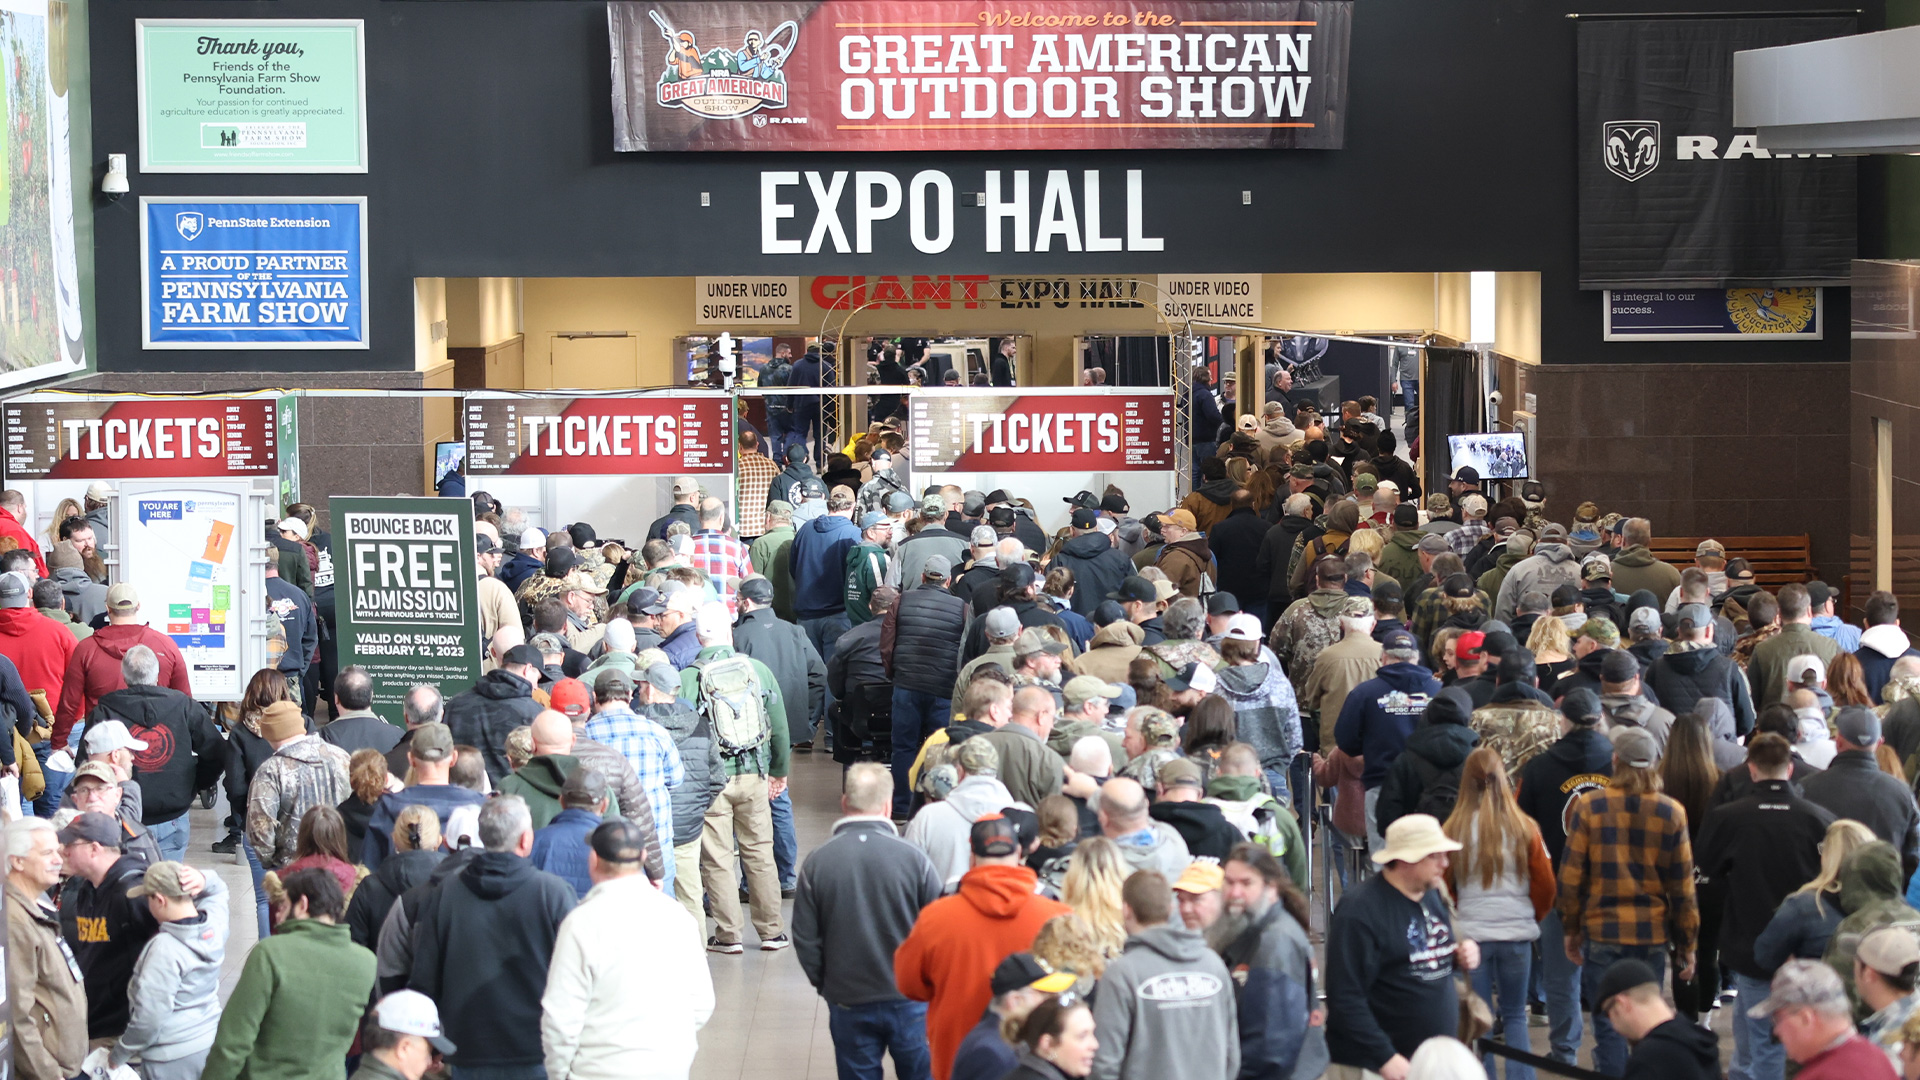 Great American Outdoor Show EXPO HALL